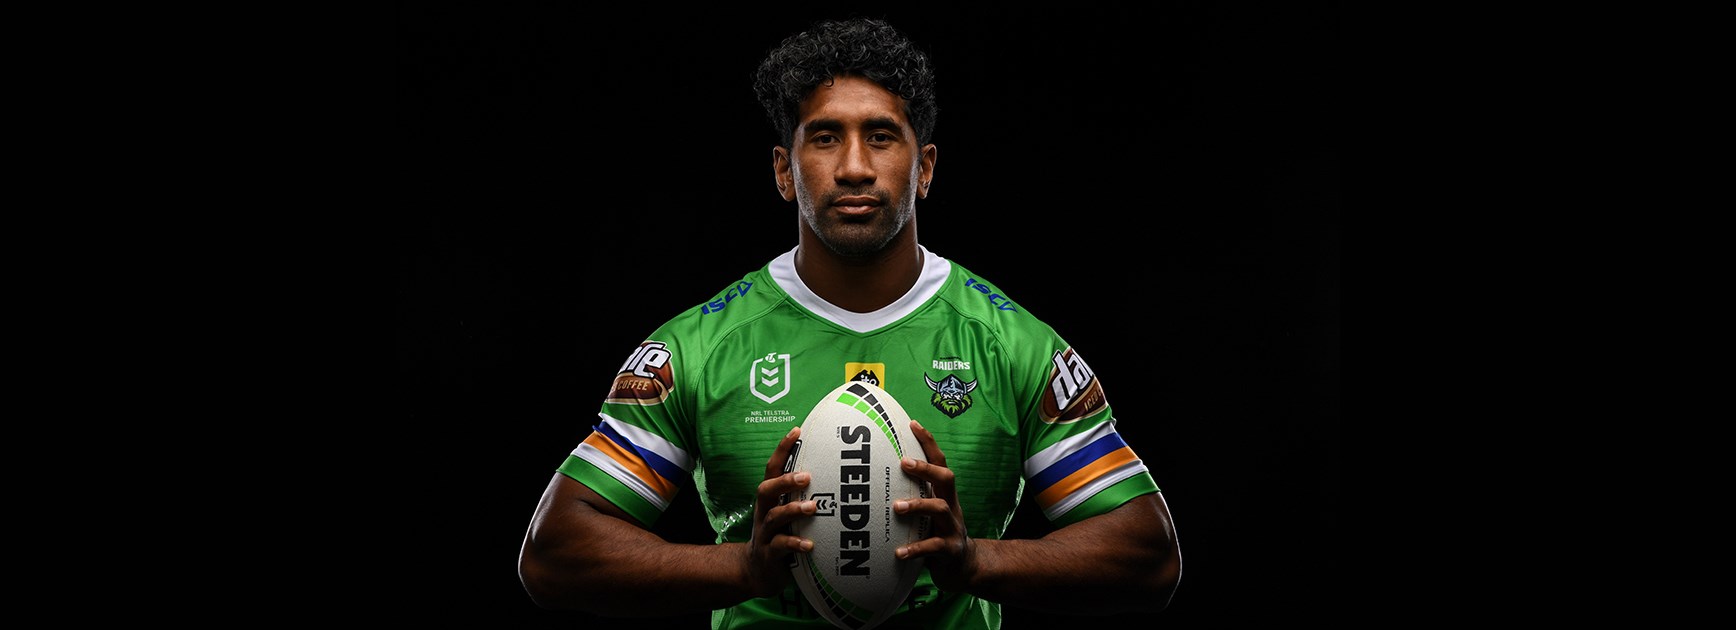 Heart and Soul: Sia Soliola Re-Signs with the Raiders